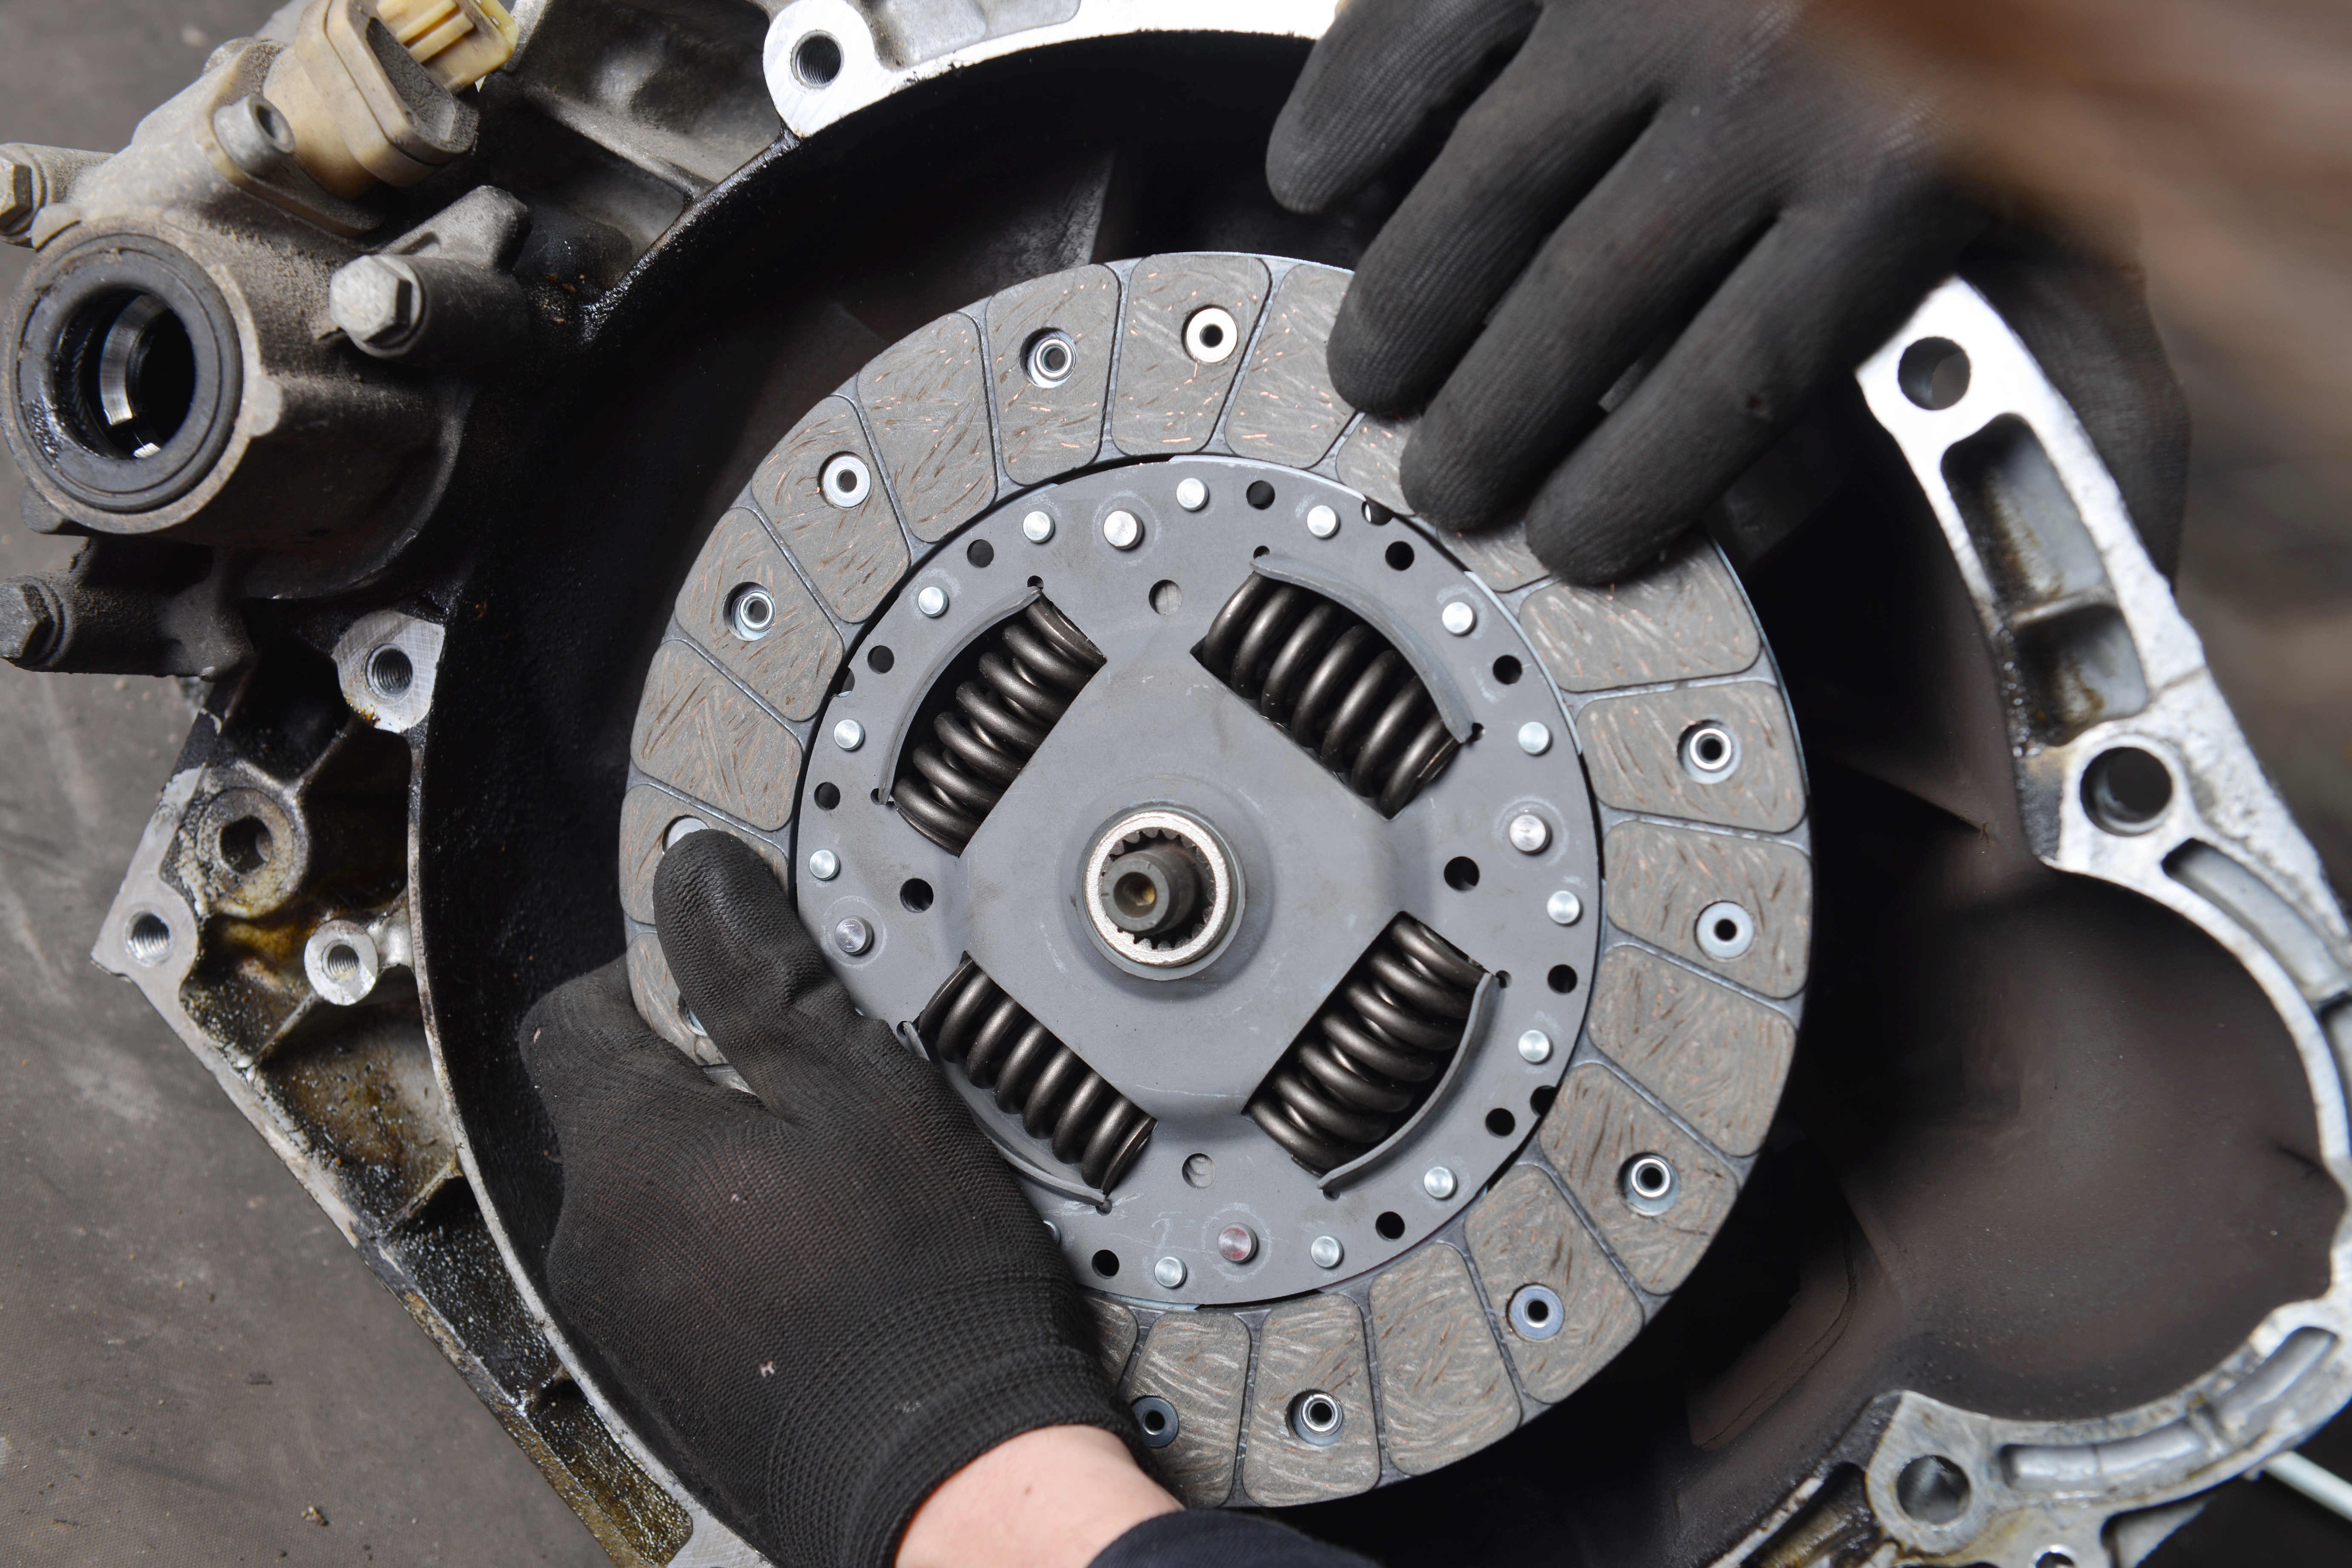 5 Warning Signs You Need A New Clutch